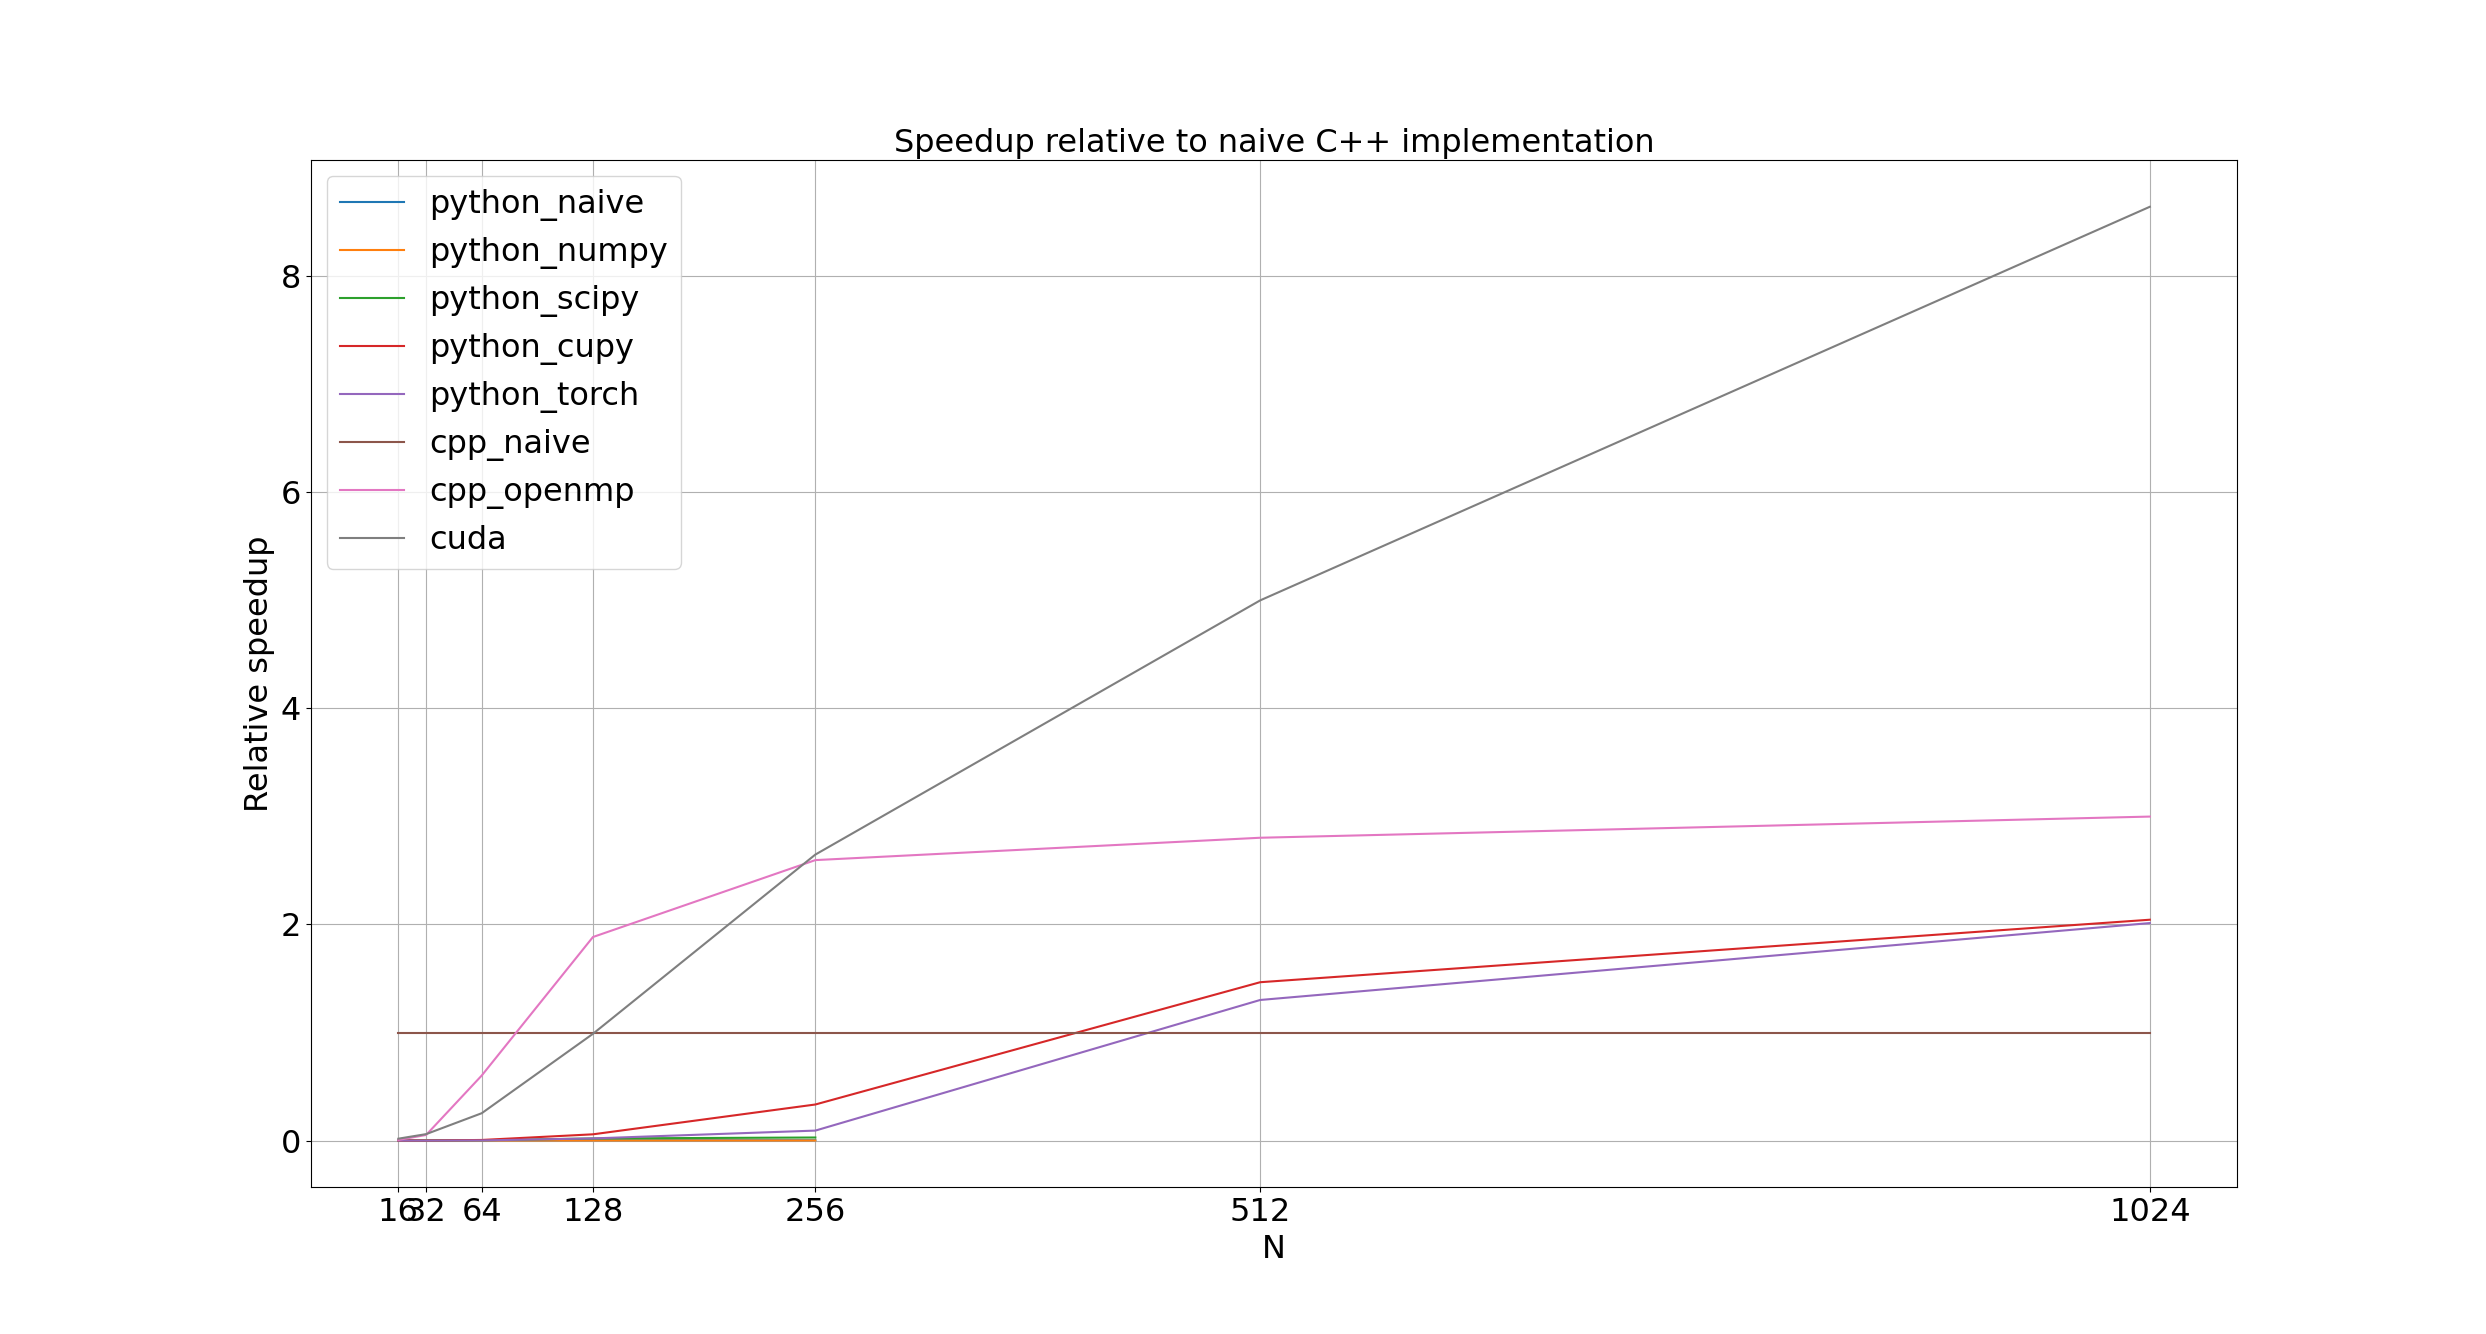 Speedup with respect to naive C++ implementation